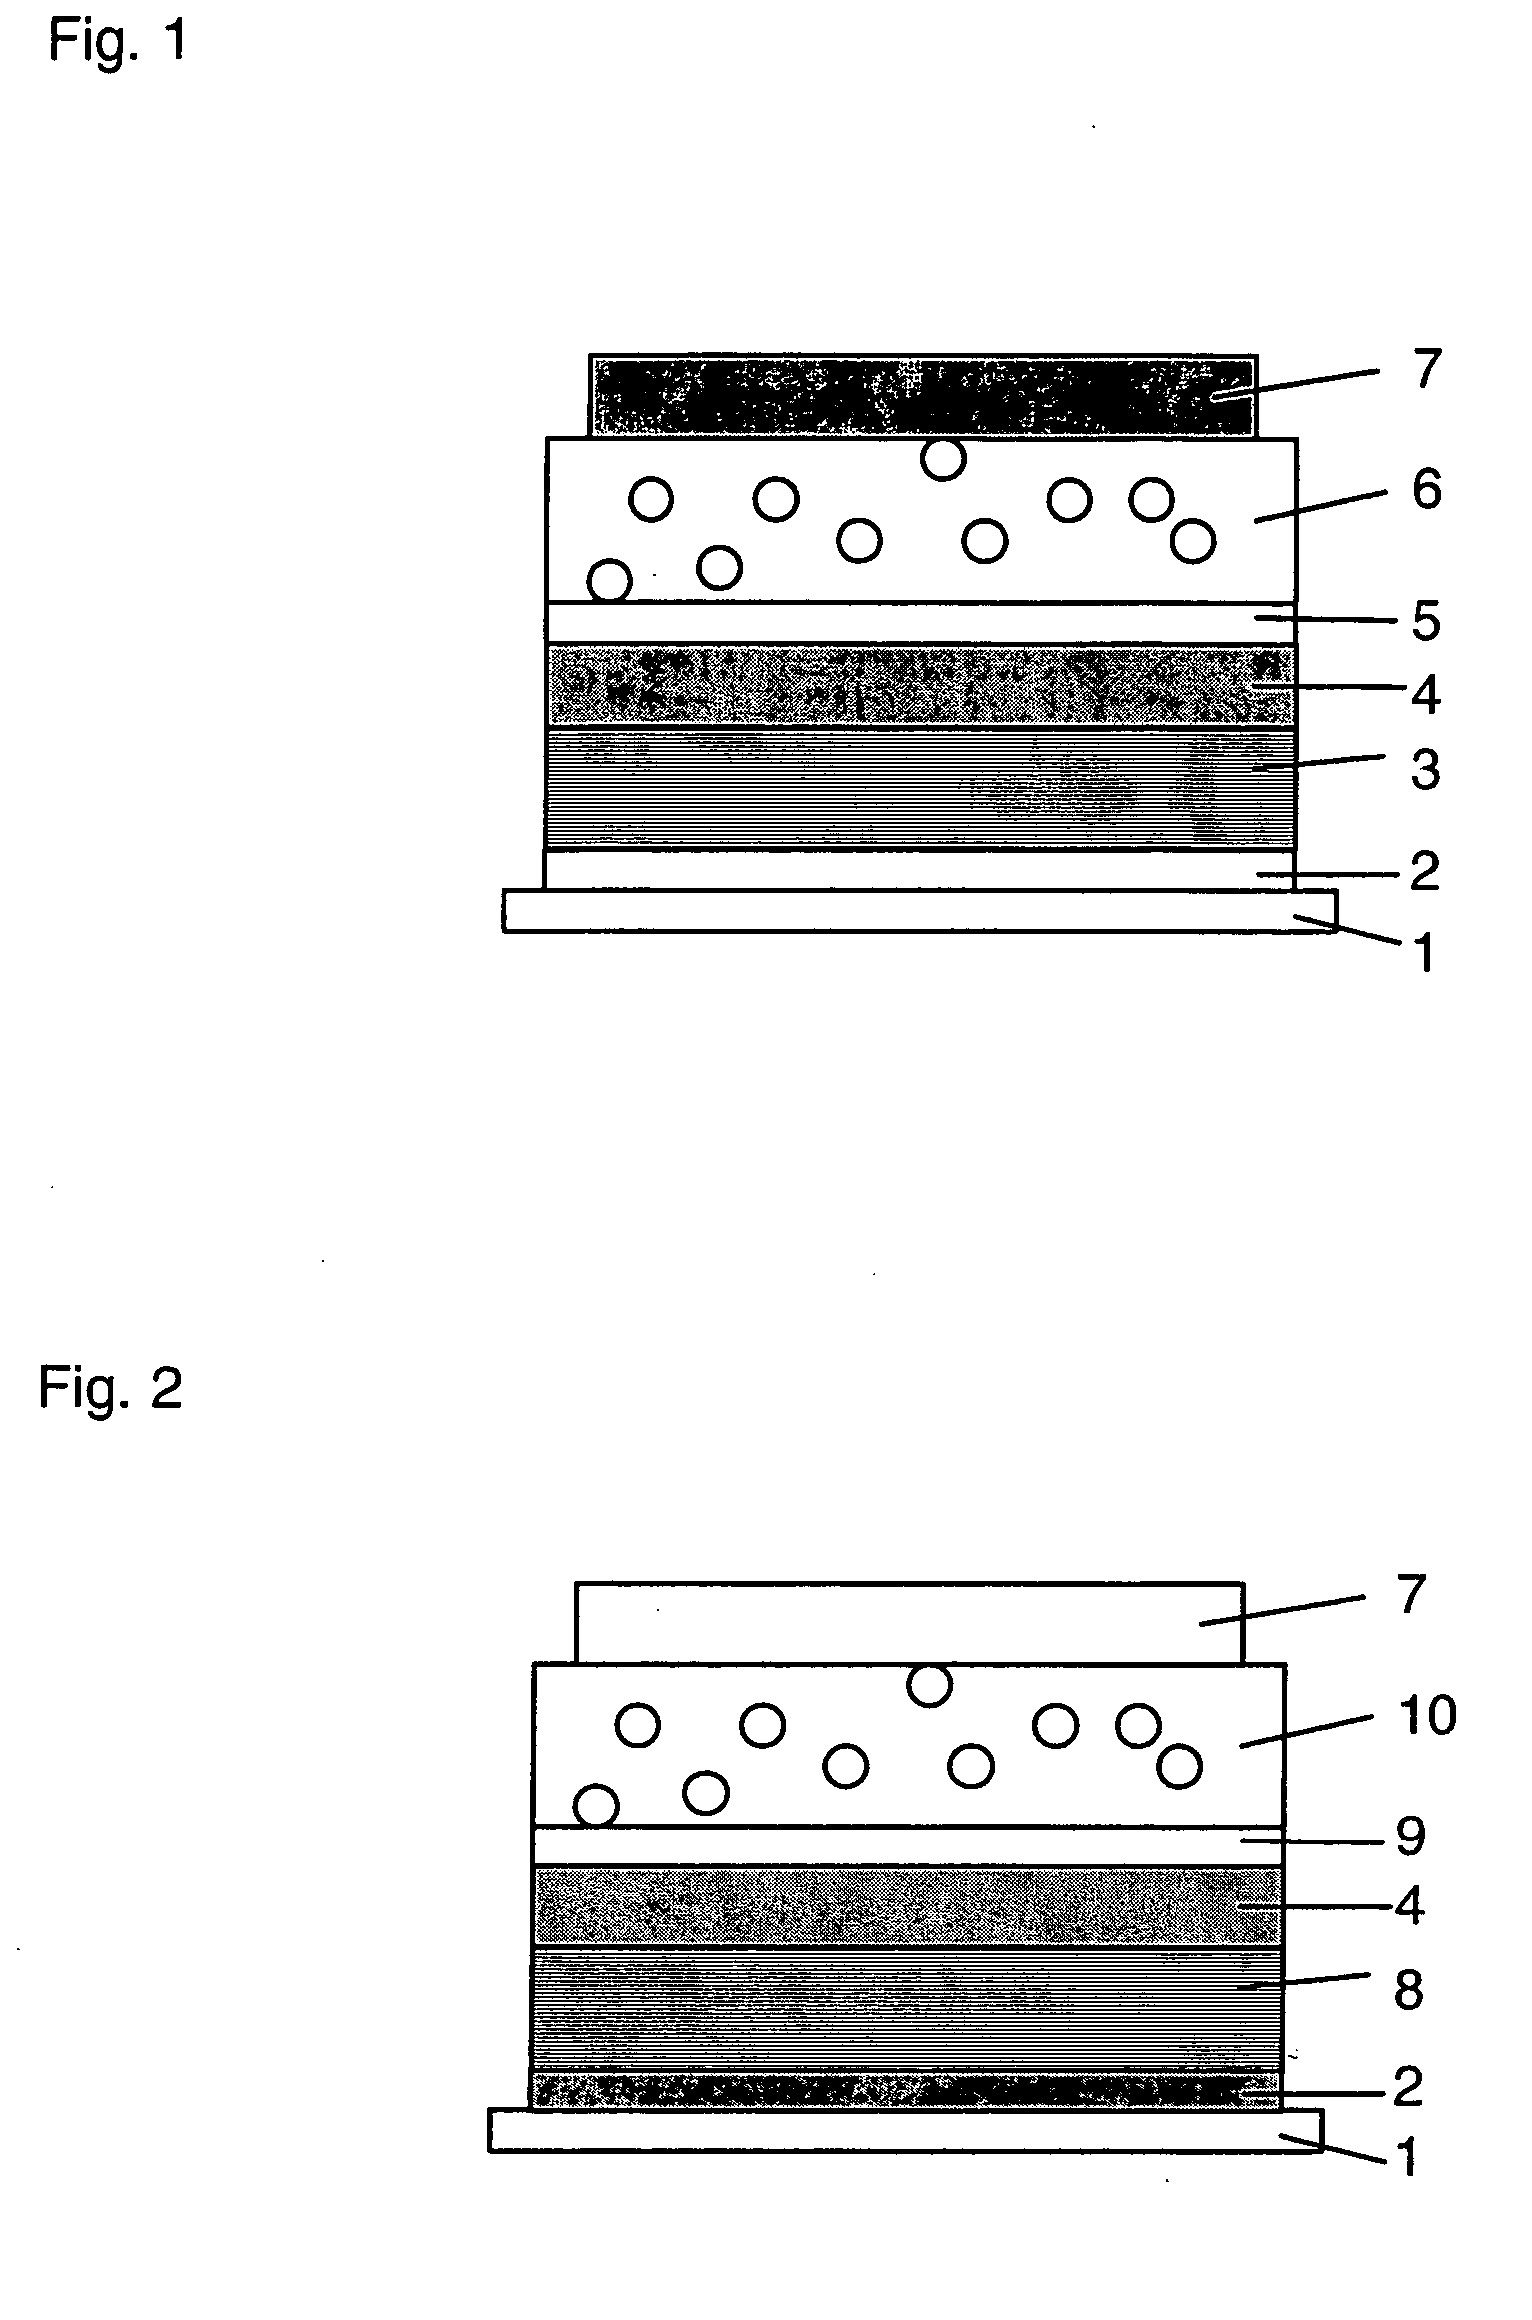 Light-emitting component and process for its preparation